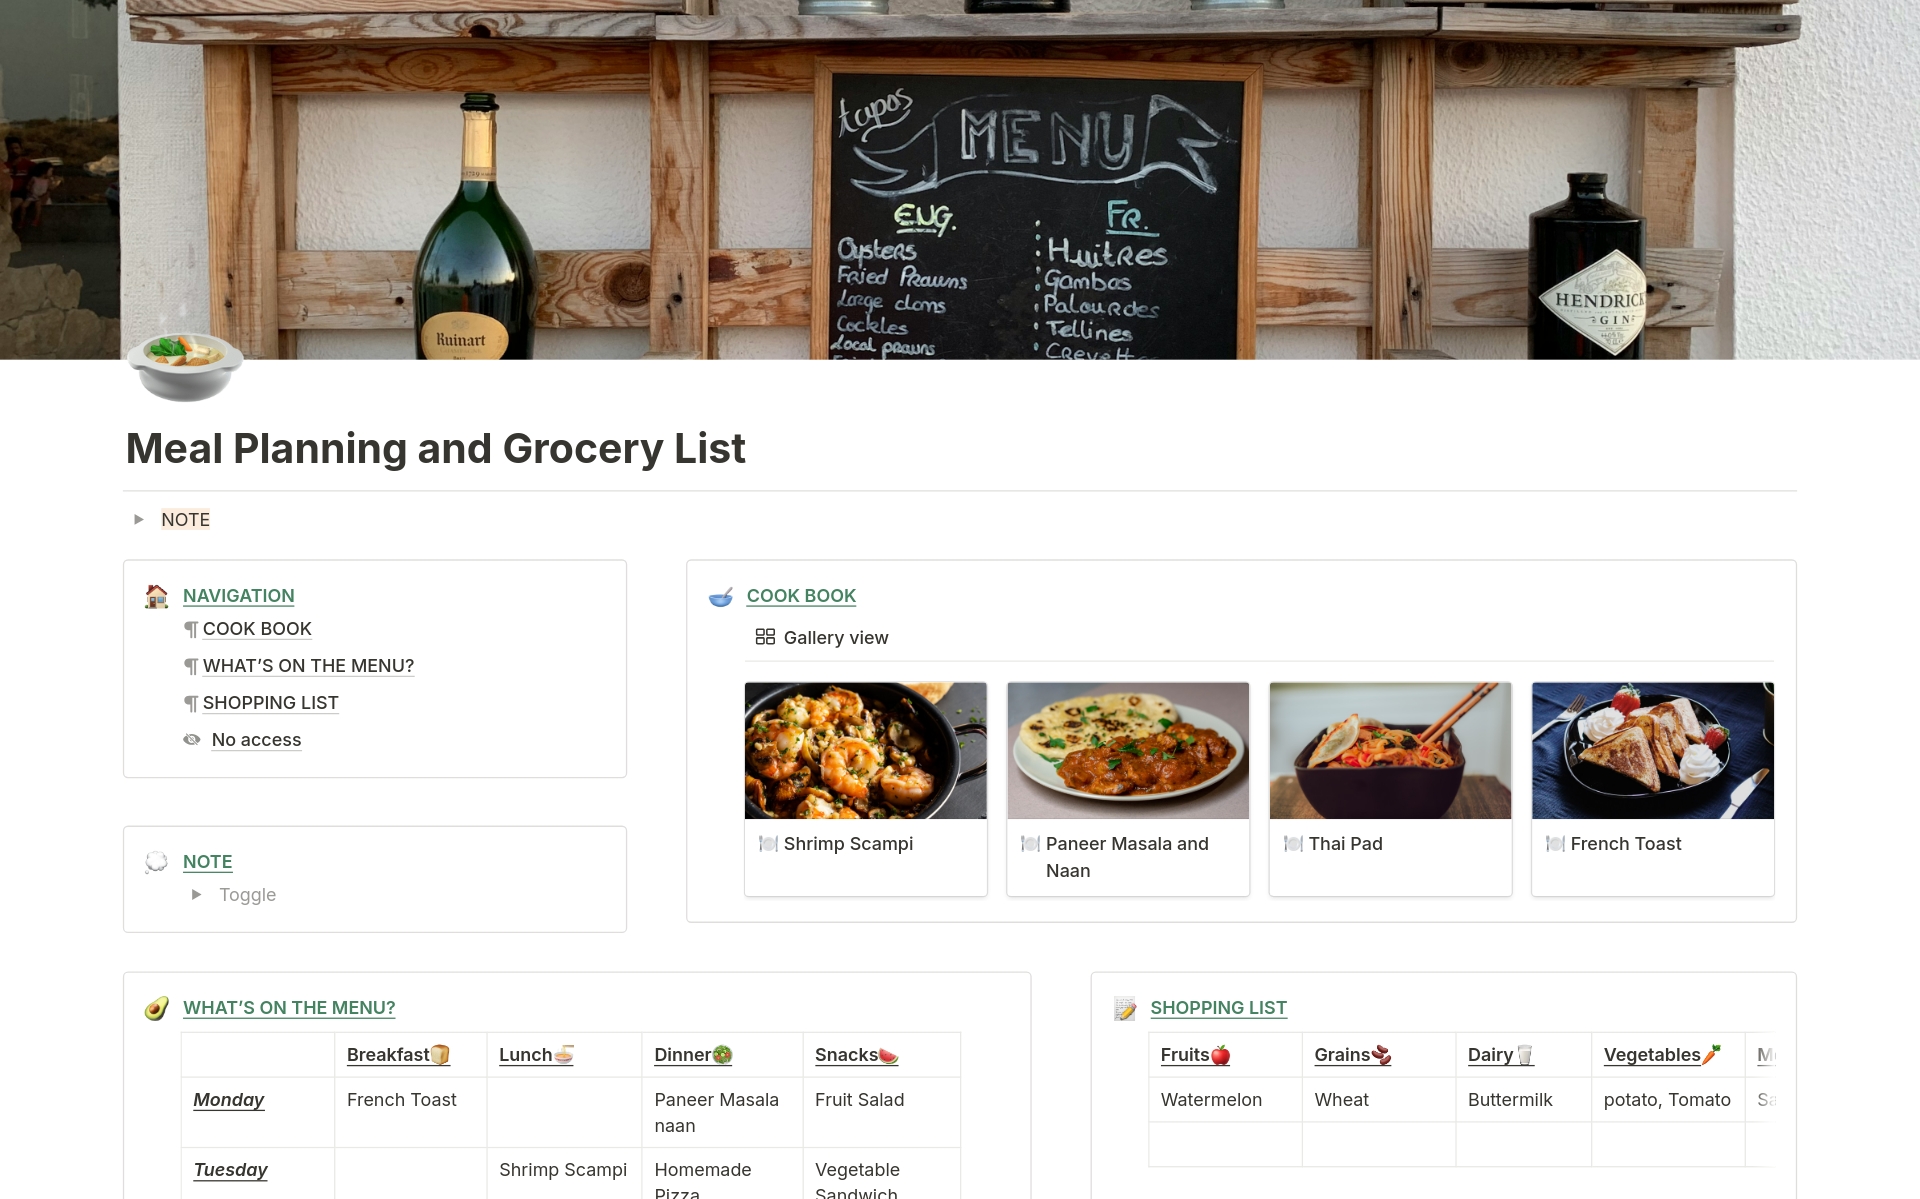 This versatile Meal Planning and Grocery List template is designed to streamline your meal planning process, making it easier to plan meals, track pantry inventory, and create shopping lists. Ideal for anyone looking to organize their meal prep and grocery shopping effectively.